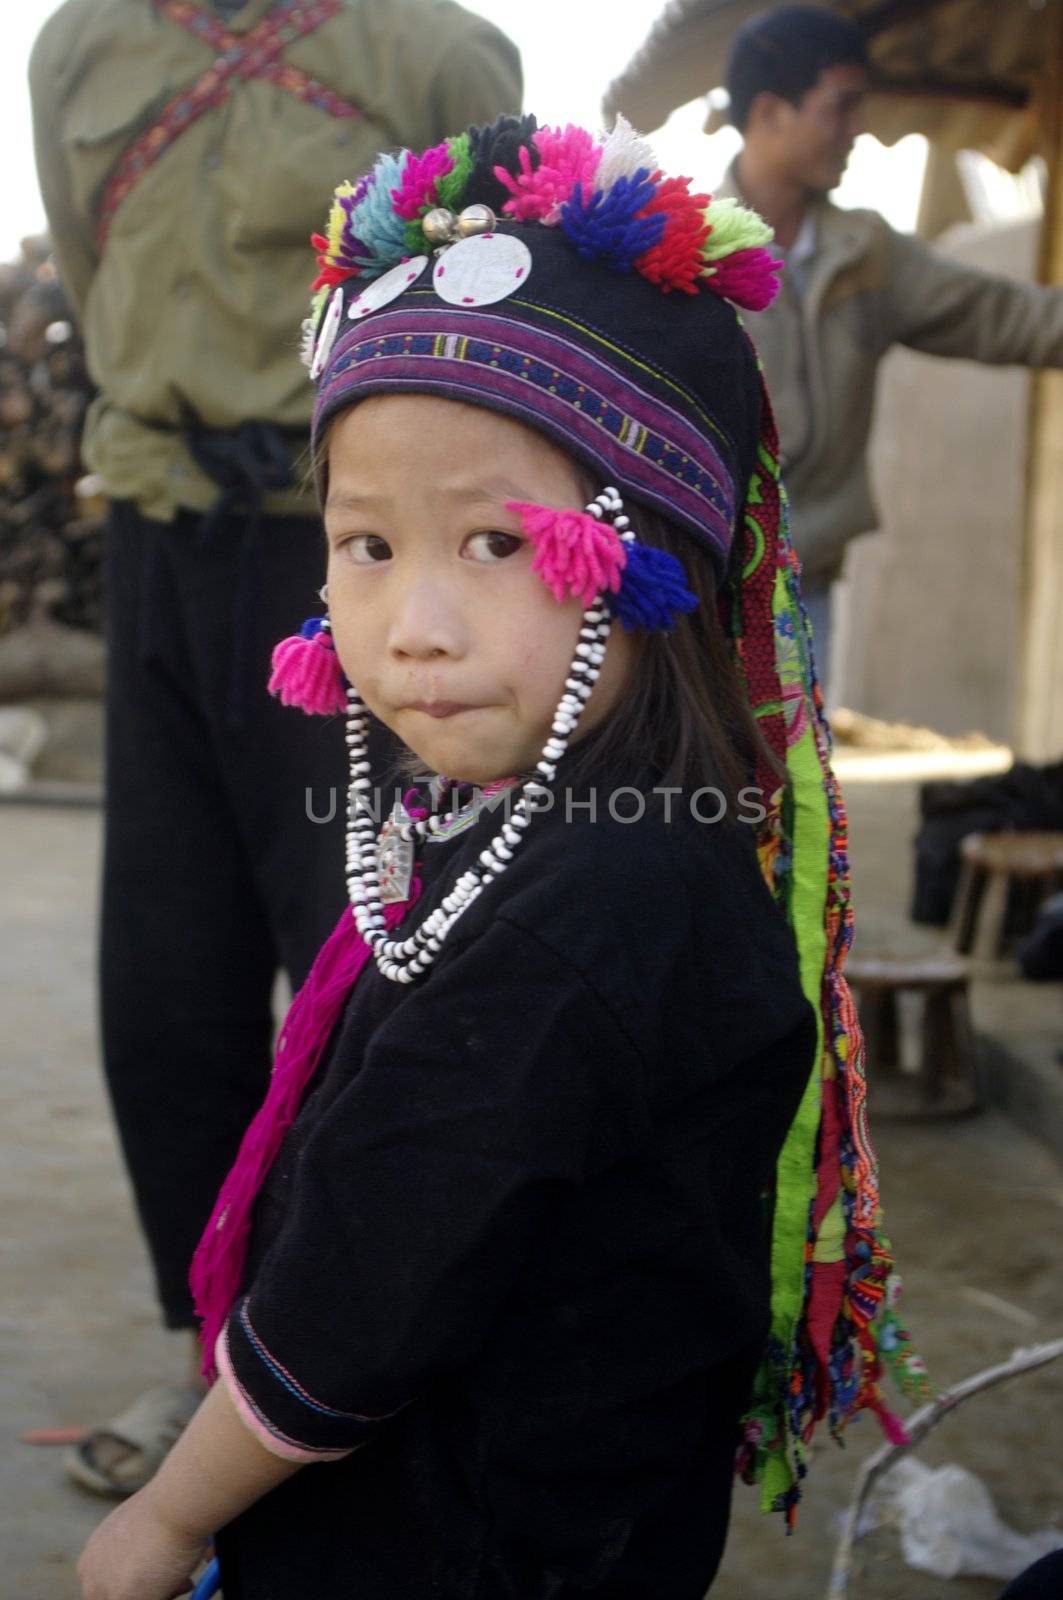 Black is also the color of clothing for children. This little girl is wearing a cap embroidered with multicolored wool tassels.